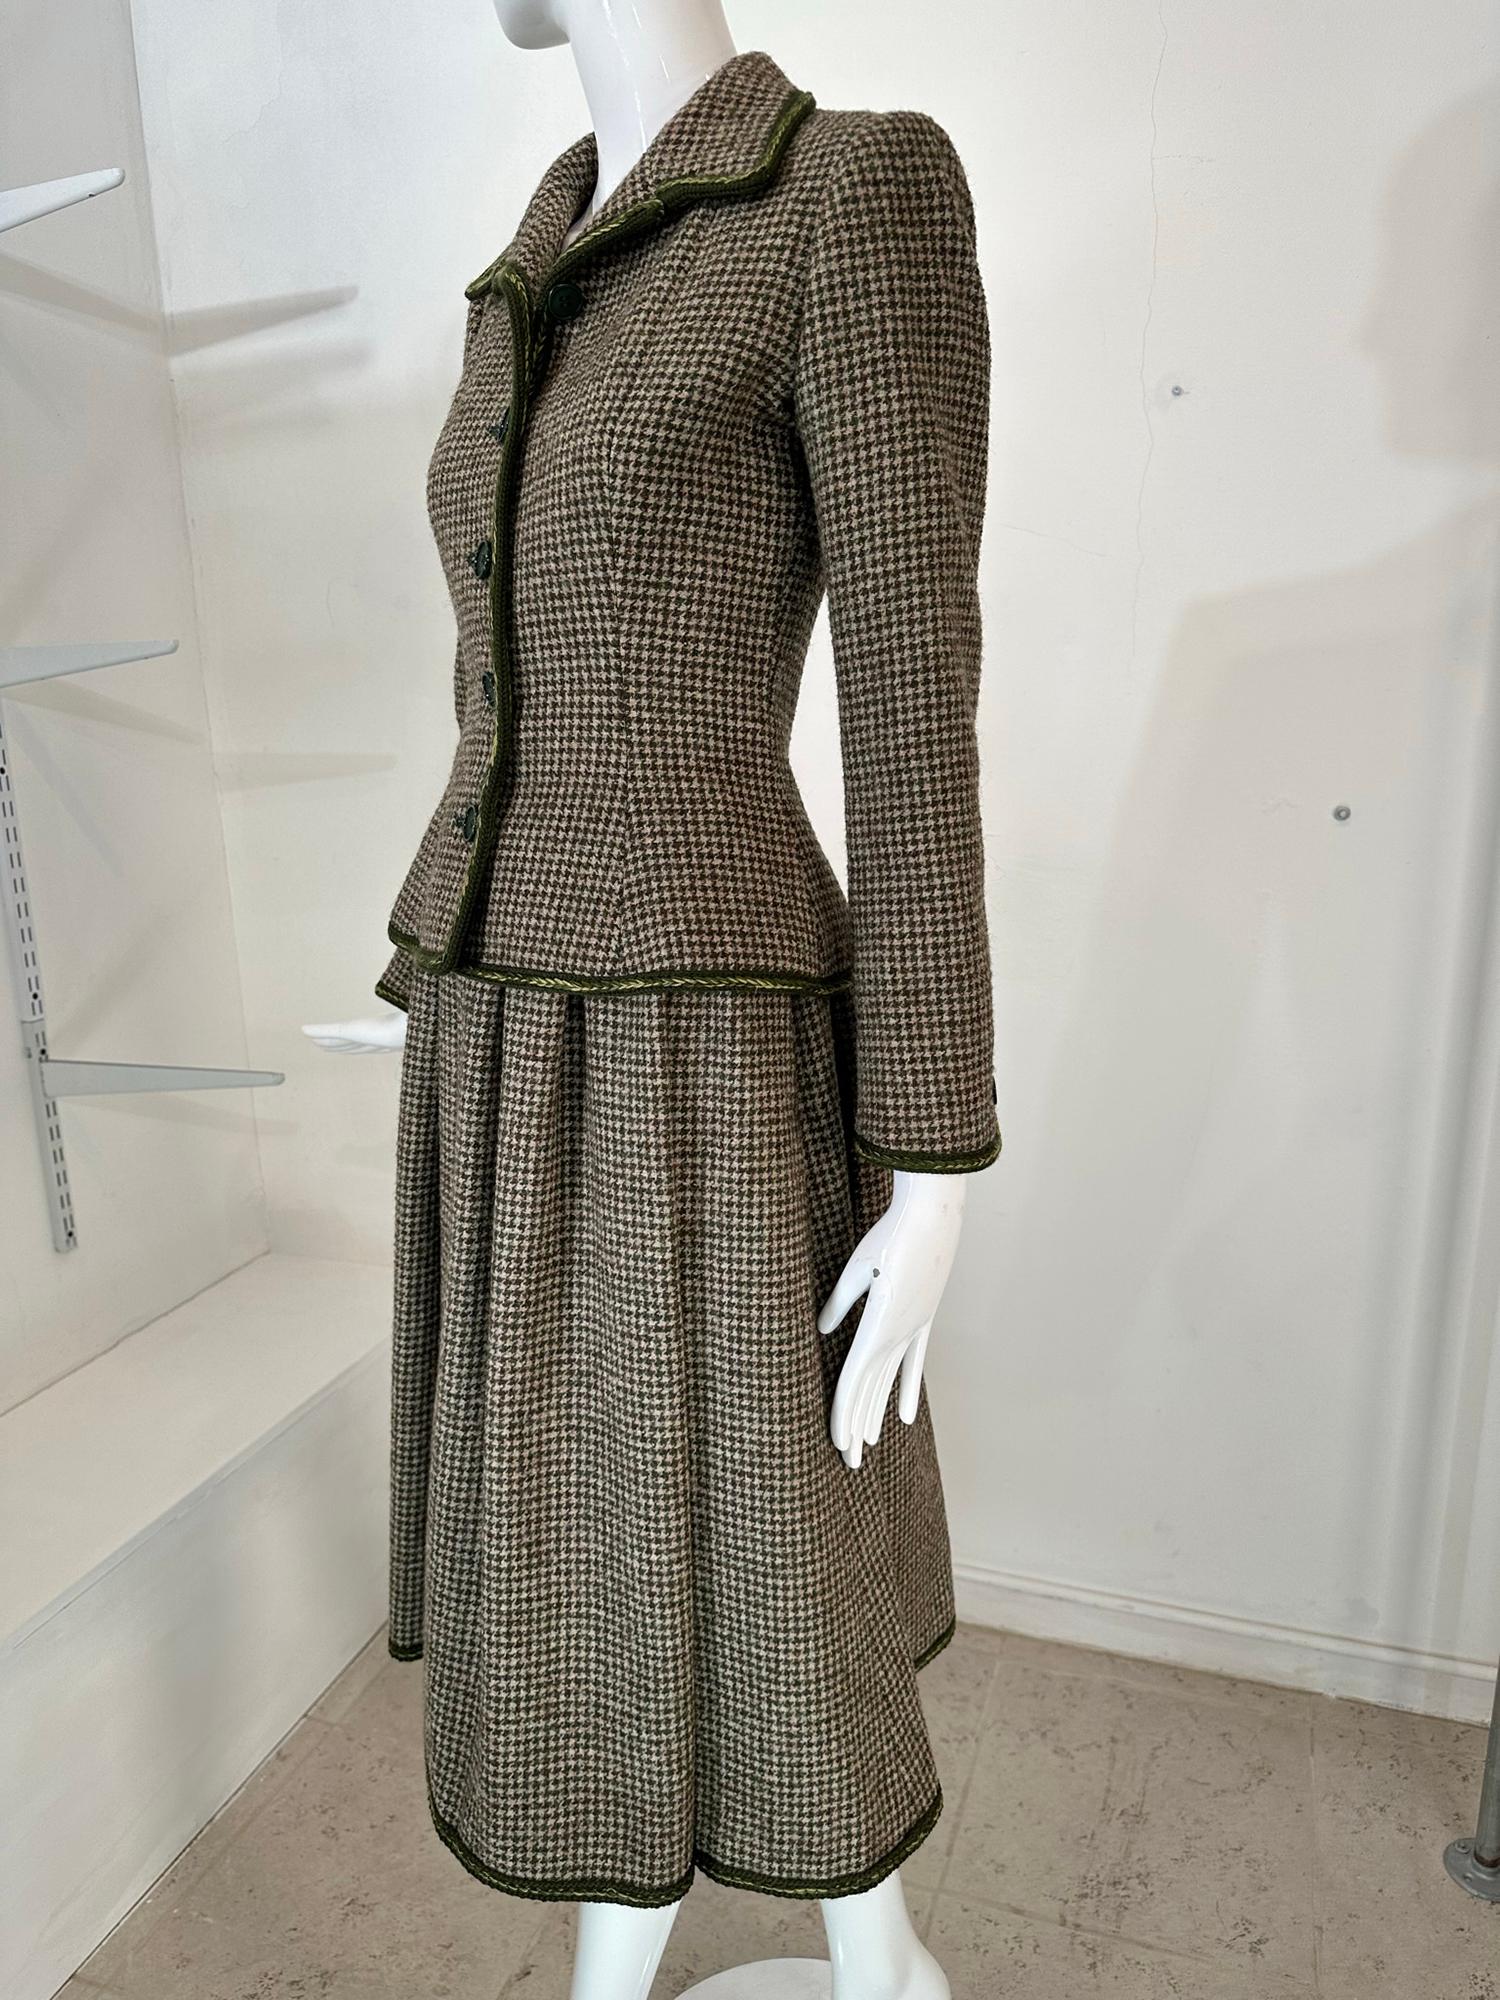 Valentino Boutique Early 1960s Green & Cream Wool Tweed Skirt Suit For Sale 1